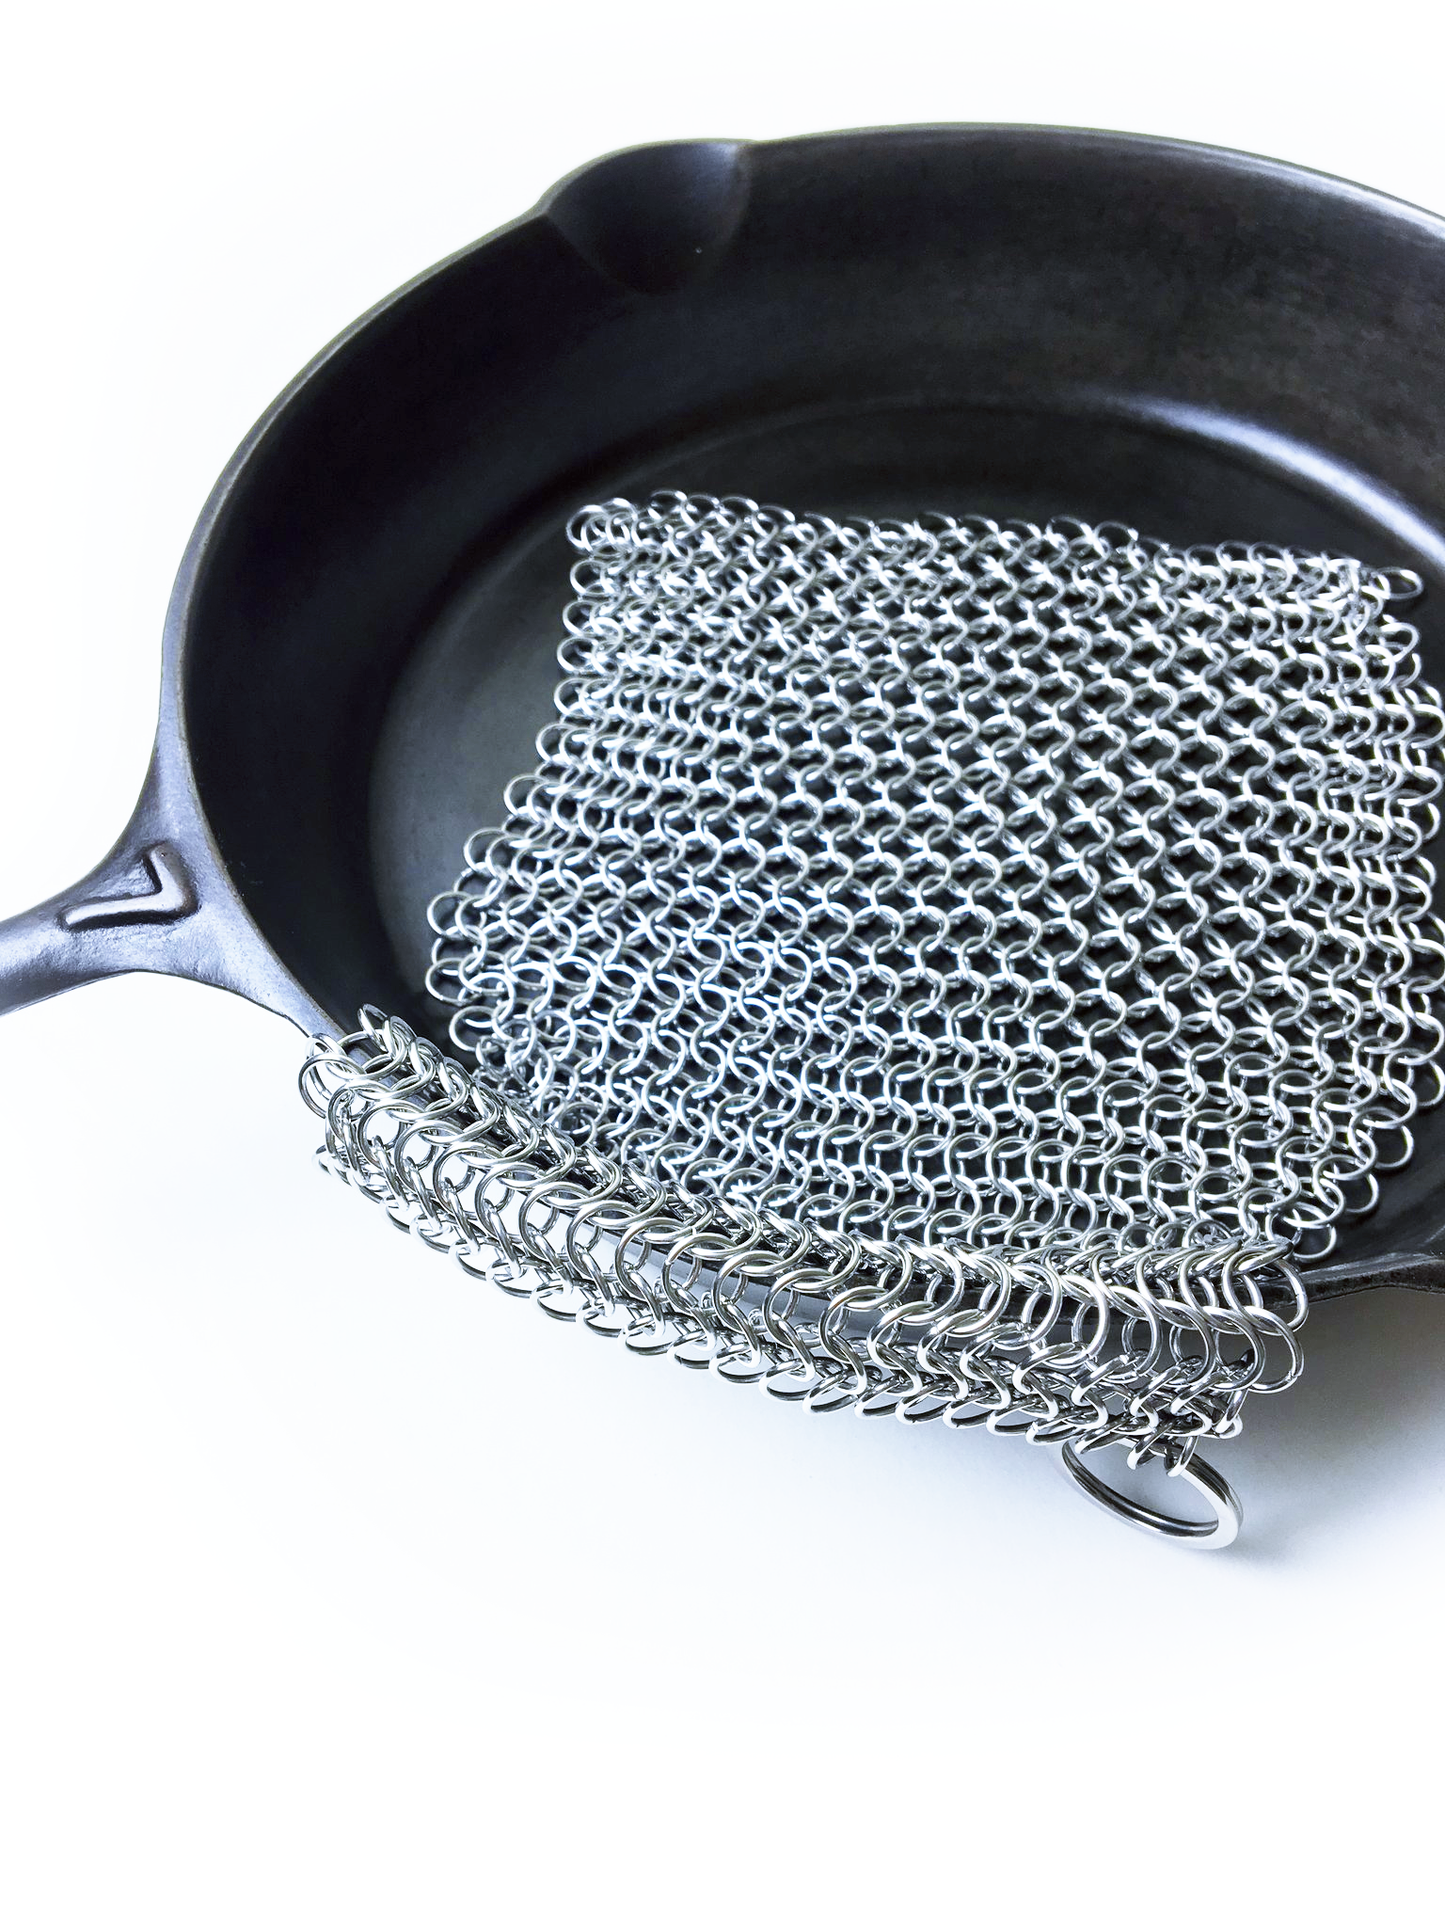 https://crisbee.org/cdn/shop/products/Chainmail_Display_with_Skillet_1_1b0c775d-6bc9-4ed6-a7de-daaac930b34d.png?v=1643848870&width=1445